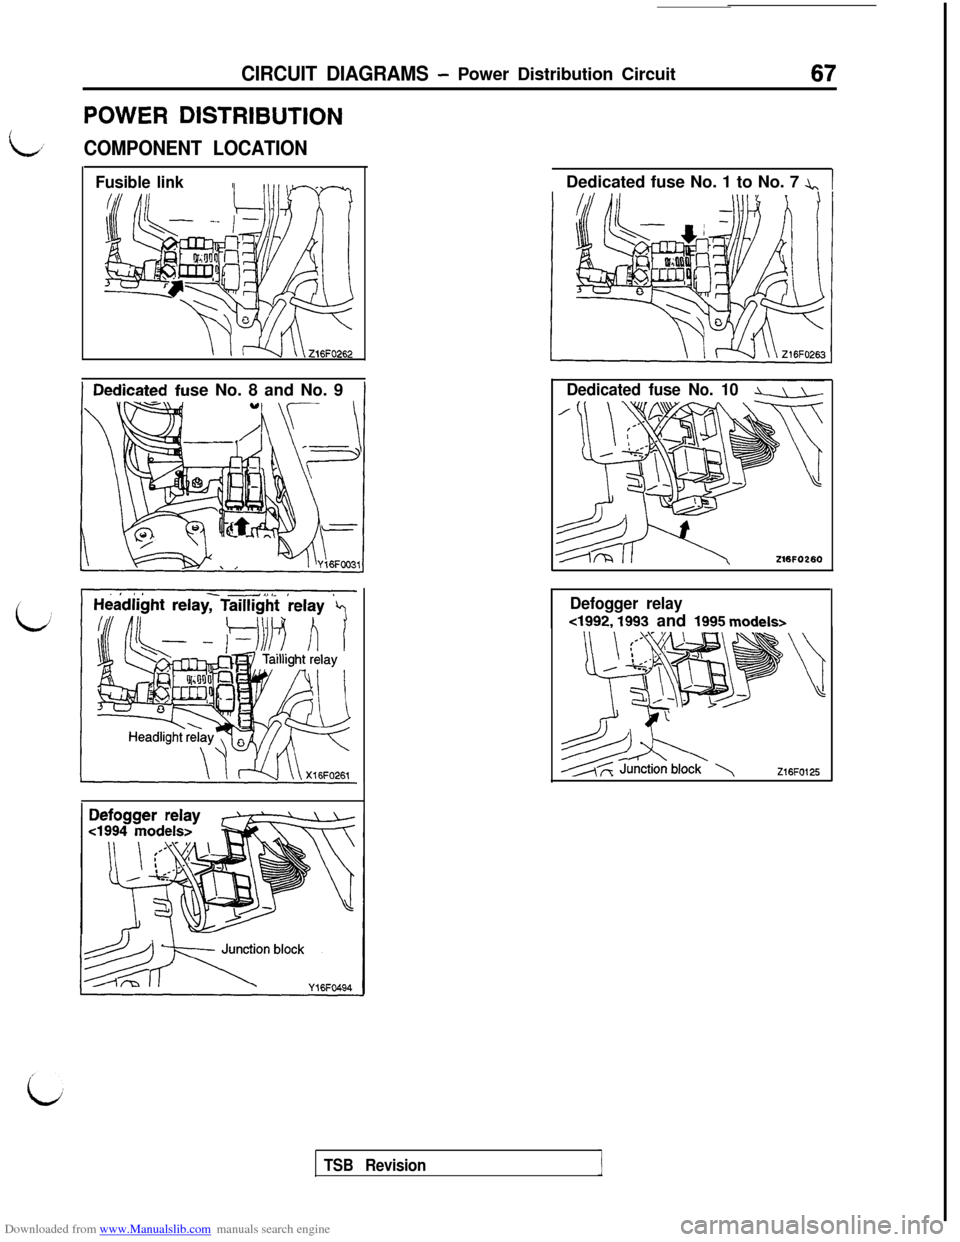 MITSUBISHI 3000GT 1993 2.G Repair Manual Downloaded from www.Manualslib.com manuals search engine CIRCUIT DIAGRAMS - Power Distribution Circuit67
POWER DISTRIBUTION
L,’COMPONENT LOCATION
Fusible linkse No. 8 and No. 9Dedicated fuse No. 1 t